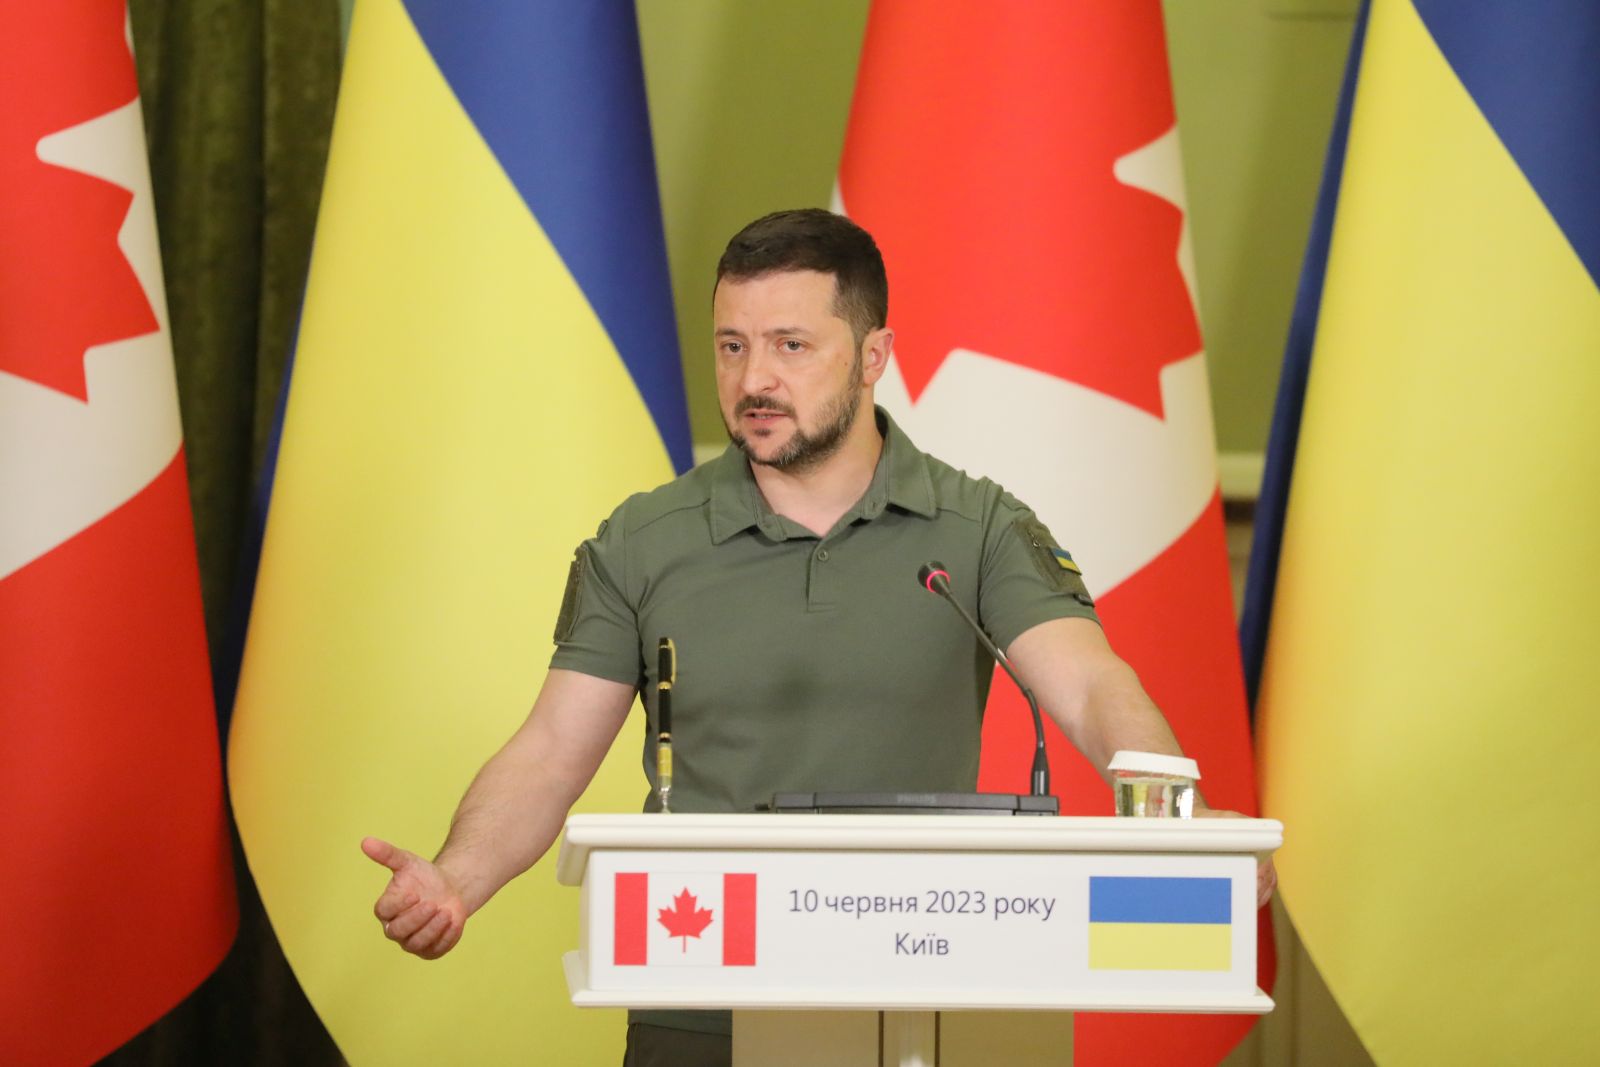 epa10683371 Ukraine's President Volodymyr Zelensky addresses a joint press conference with Canada's Prime Minister Justin Trudeau (not pictured) in Kyiv (Kiev), Ukraine, 10 June 2023, amid the Russian invasion.  EPA/OLEG PETRASYUK